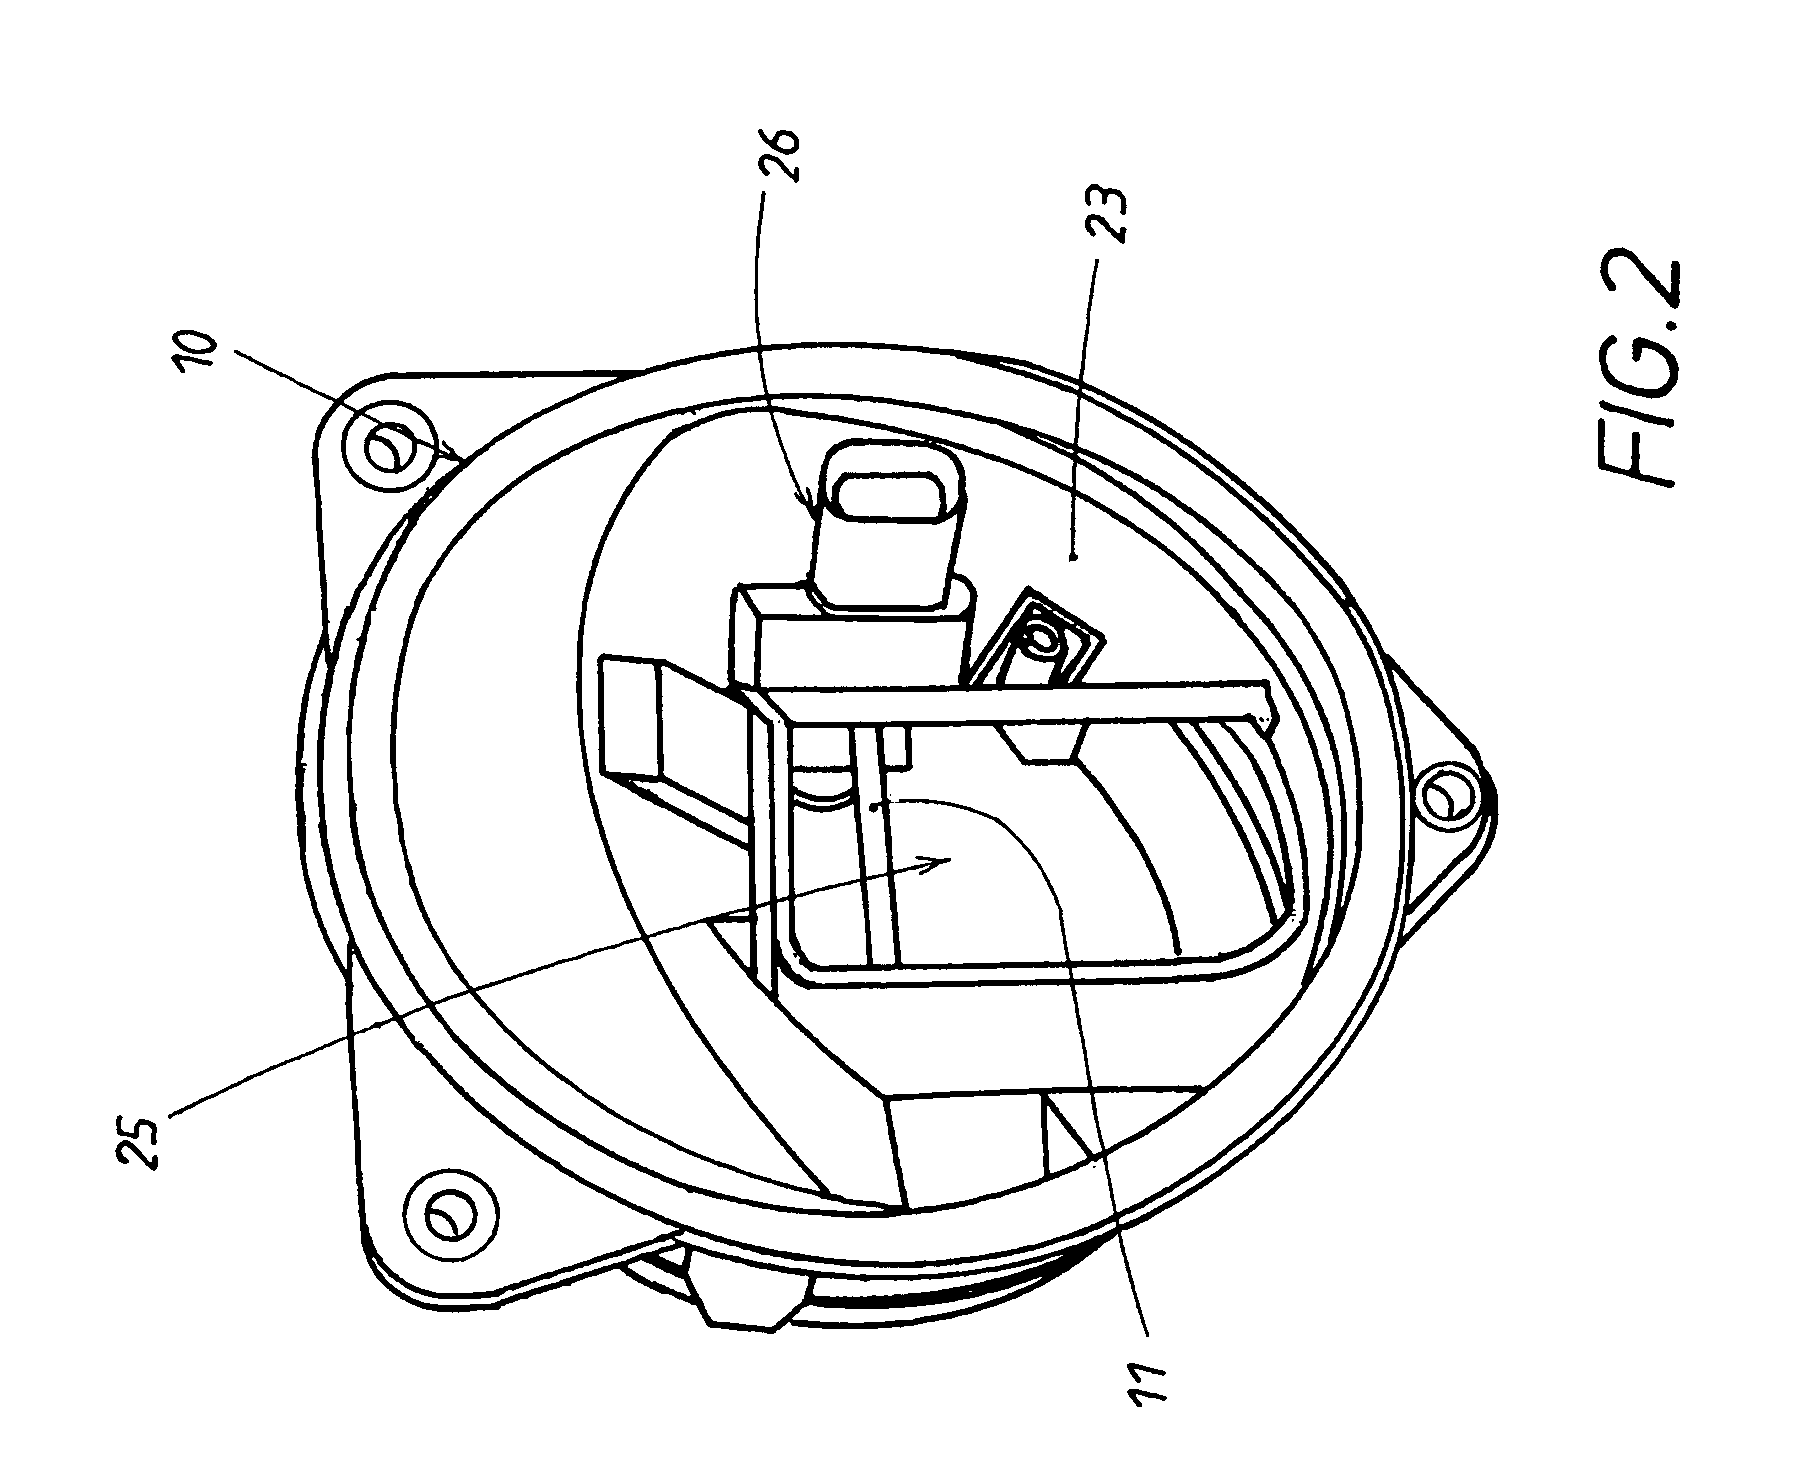 Device for opening a vehicle lock and for capturing an image on the exterior of the vehicle